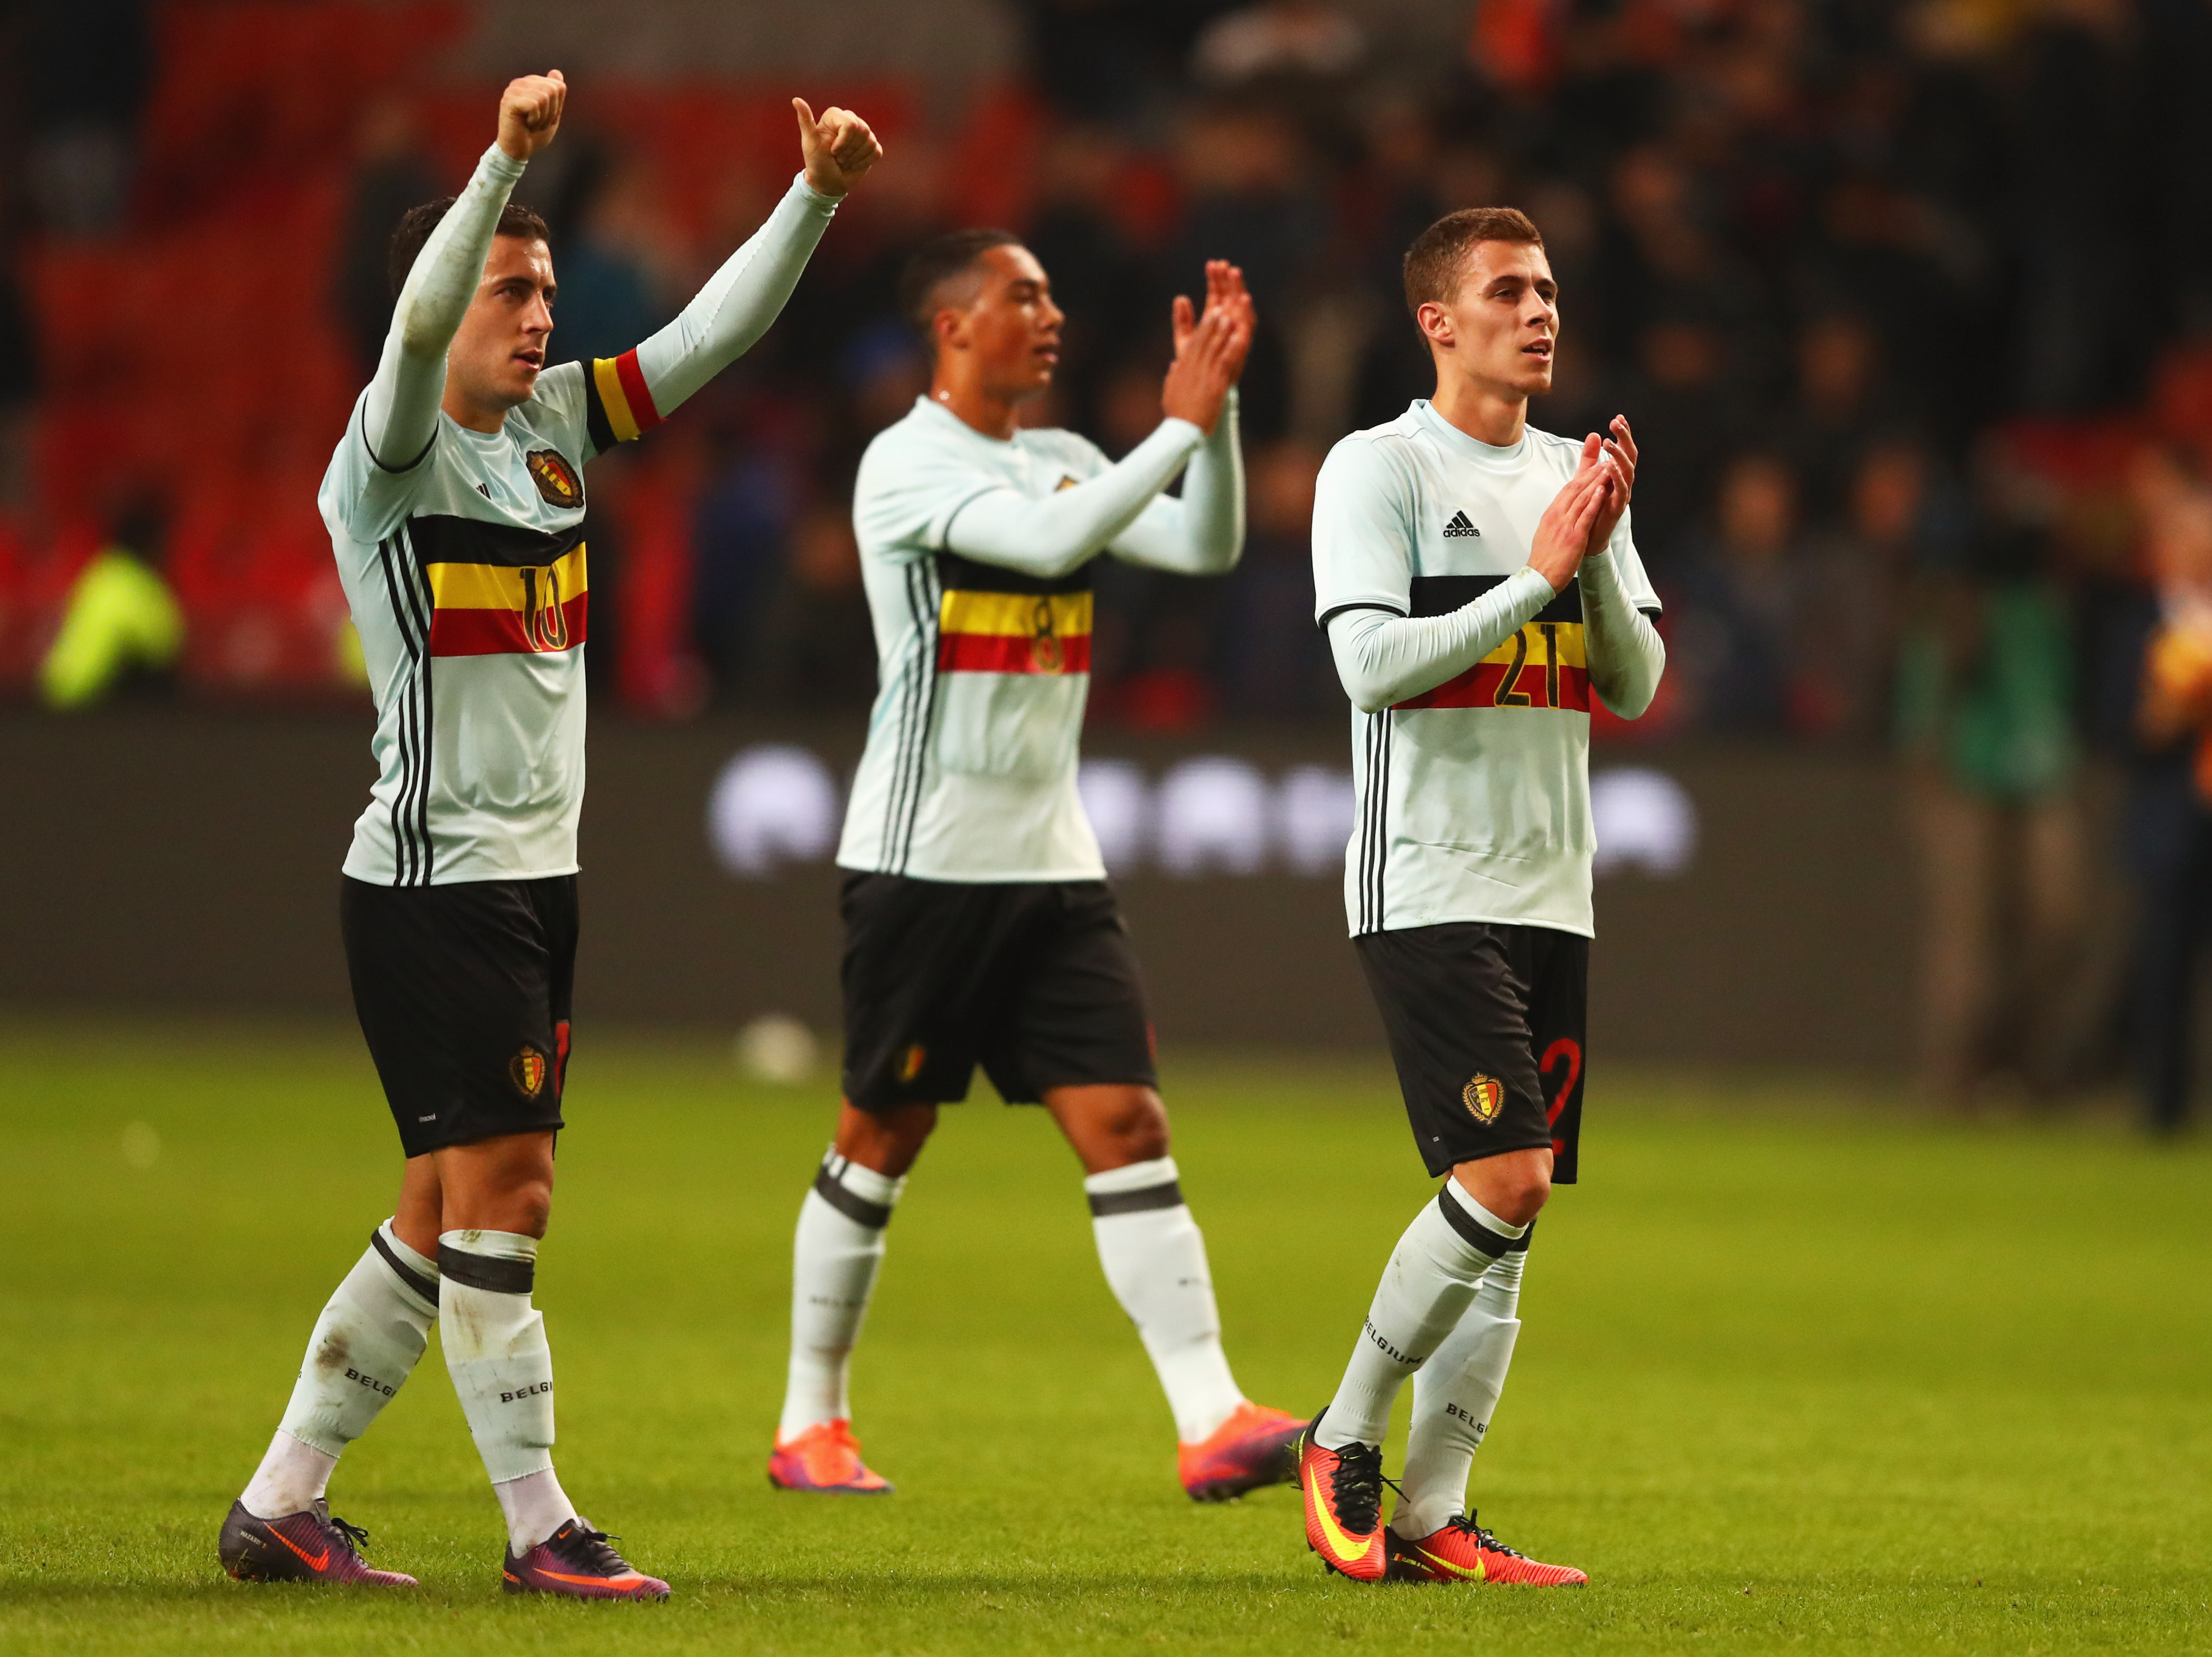 AMSTERDAM, NETHERLANDS - NOVEMBER 09:  Thorgan Hazard and Eden Hazard of Belgium (L) applaud the travelling fans after the international friendly match between Netherlands and Belgium at Amsterdam Arena on November 9, 2016 in Amsterdam, Netherlands.  (Photo by Dean Mouhtaropoulos/Getty Images)